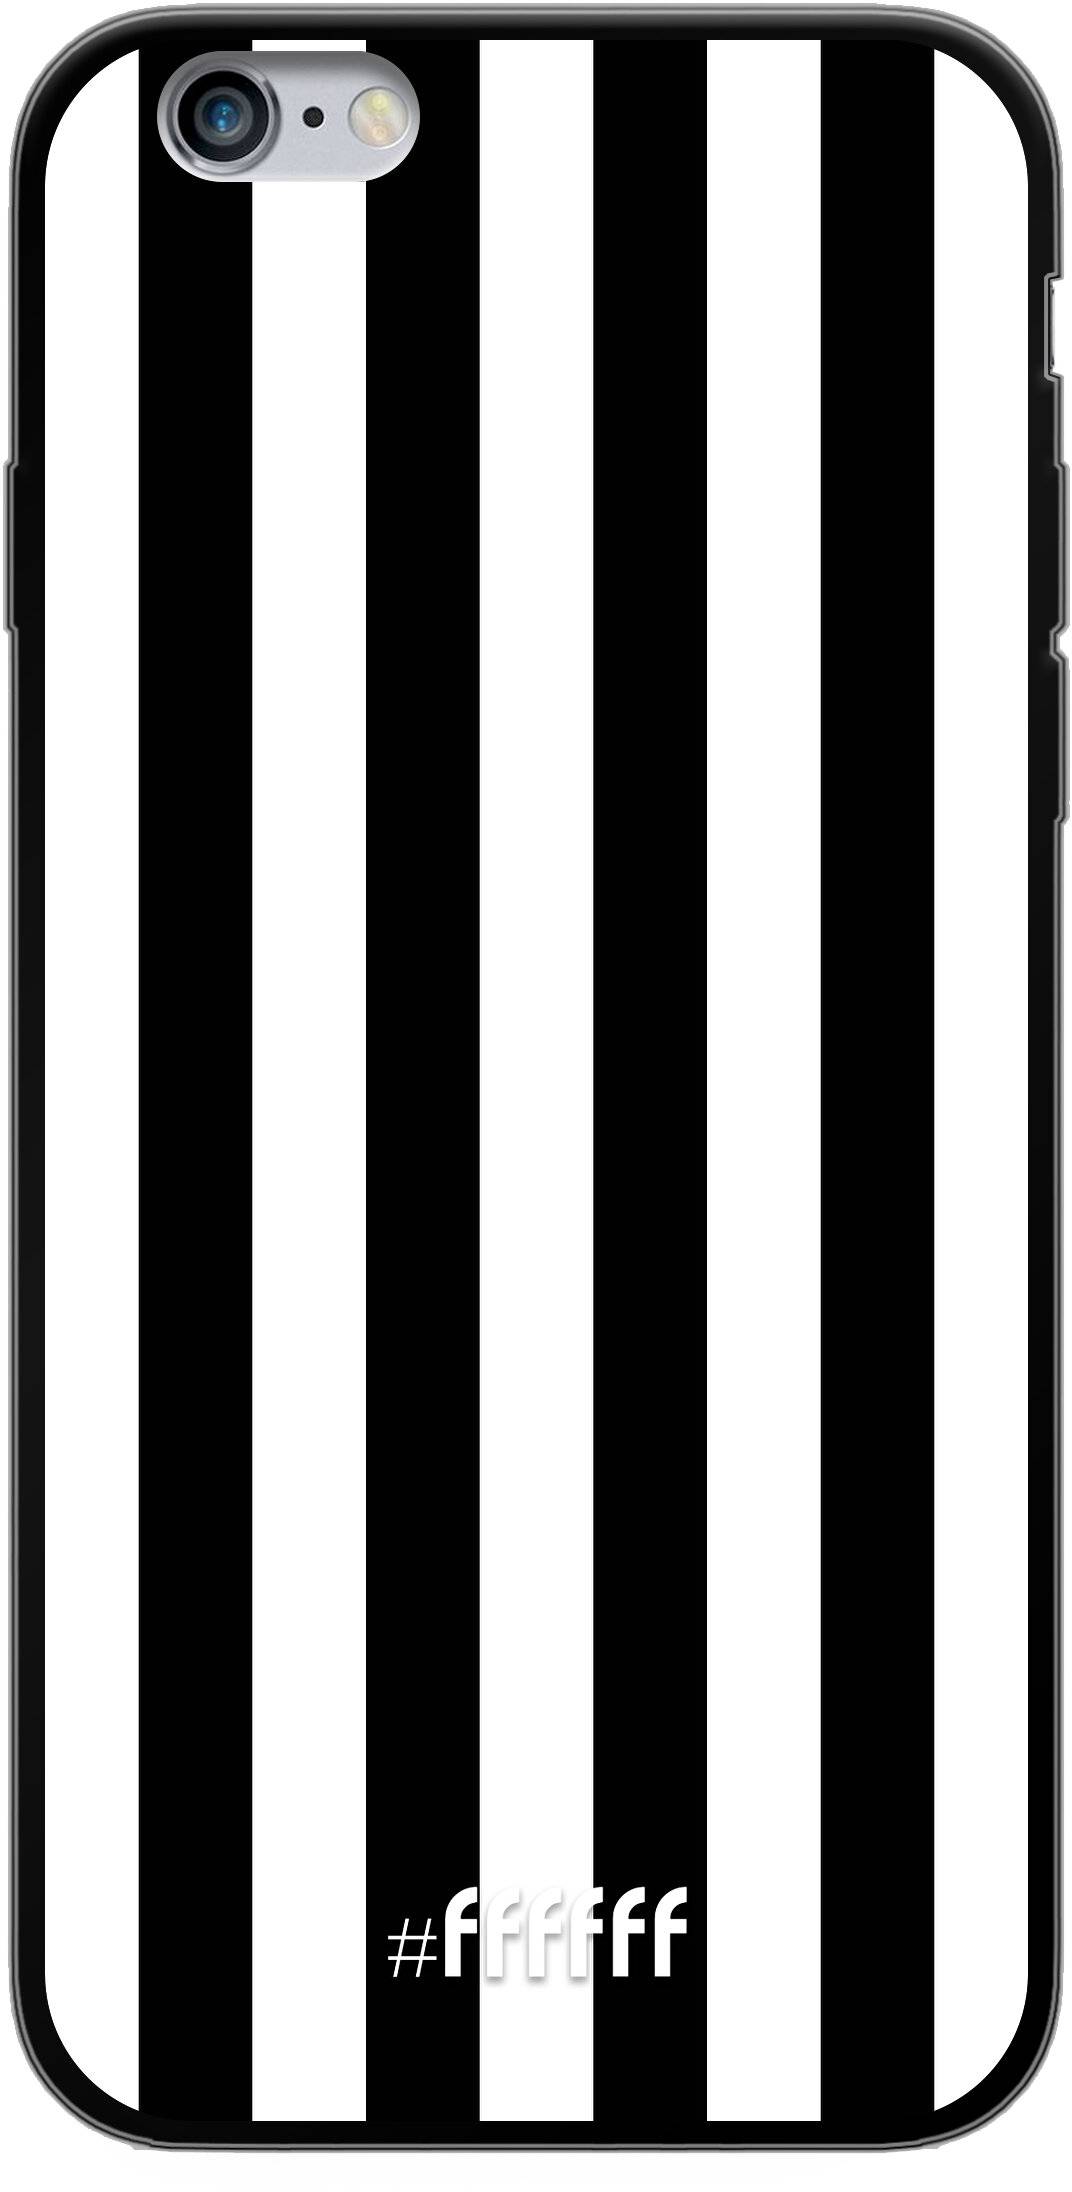 Heracles Almelo iPhone 6